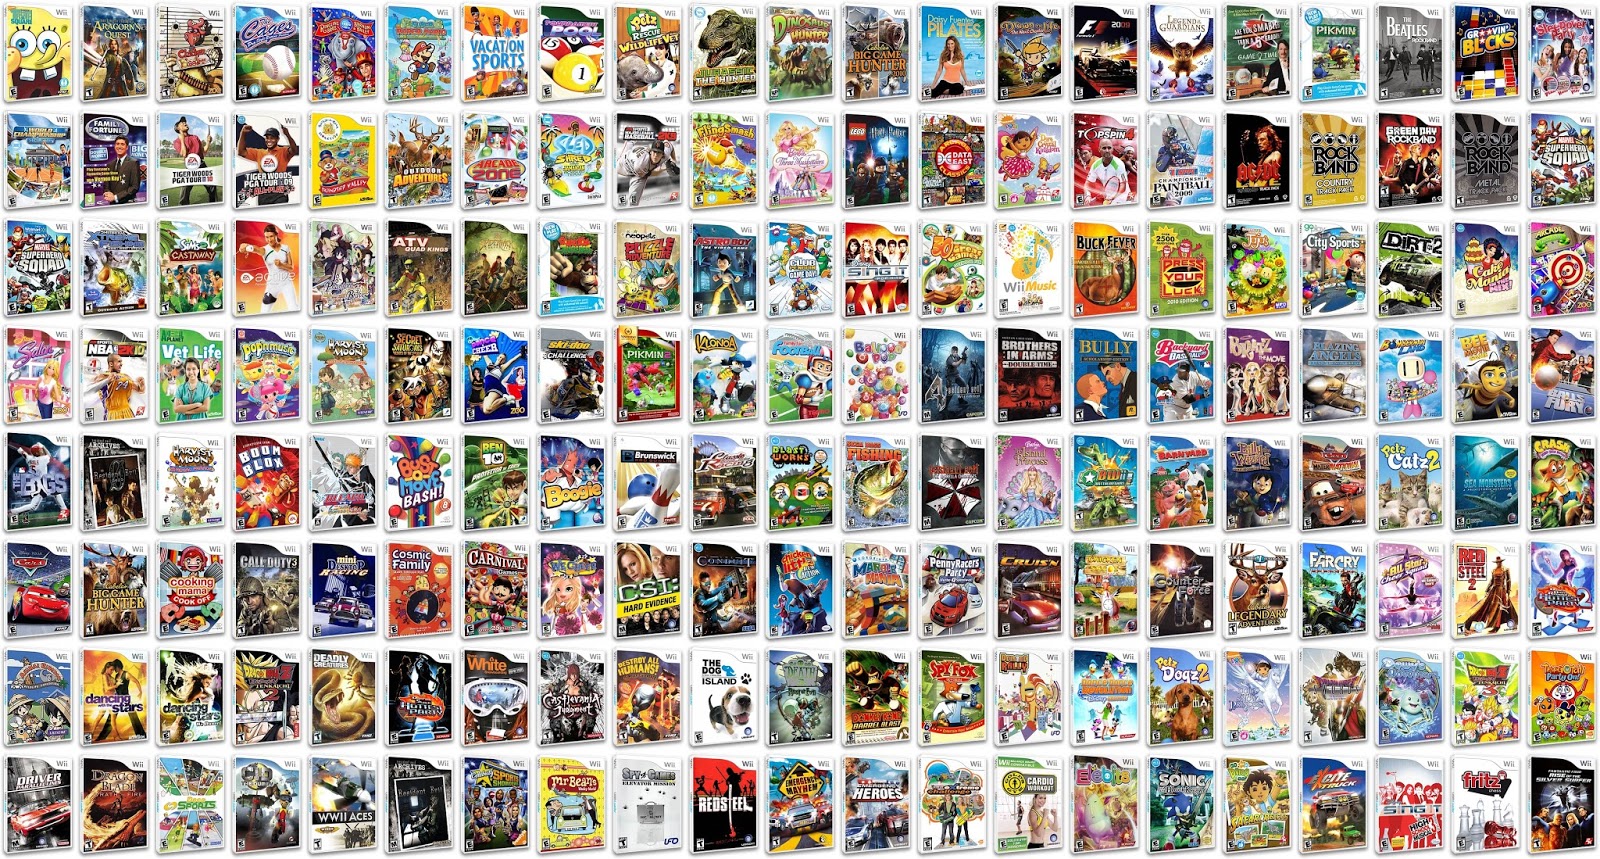 Best Descargar Juegos Wii Iso Gratis 1 Link Where can i find legit wbfs files to load onto a modded wii? best descargar juegos wii iso gratis 1 link